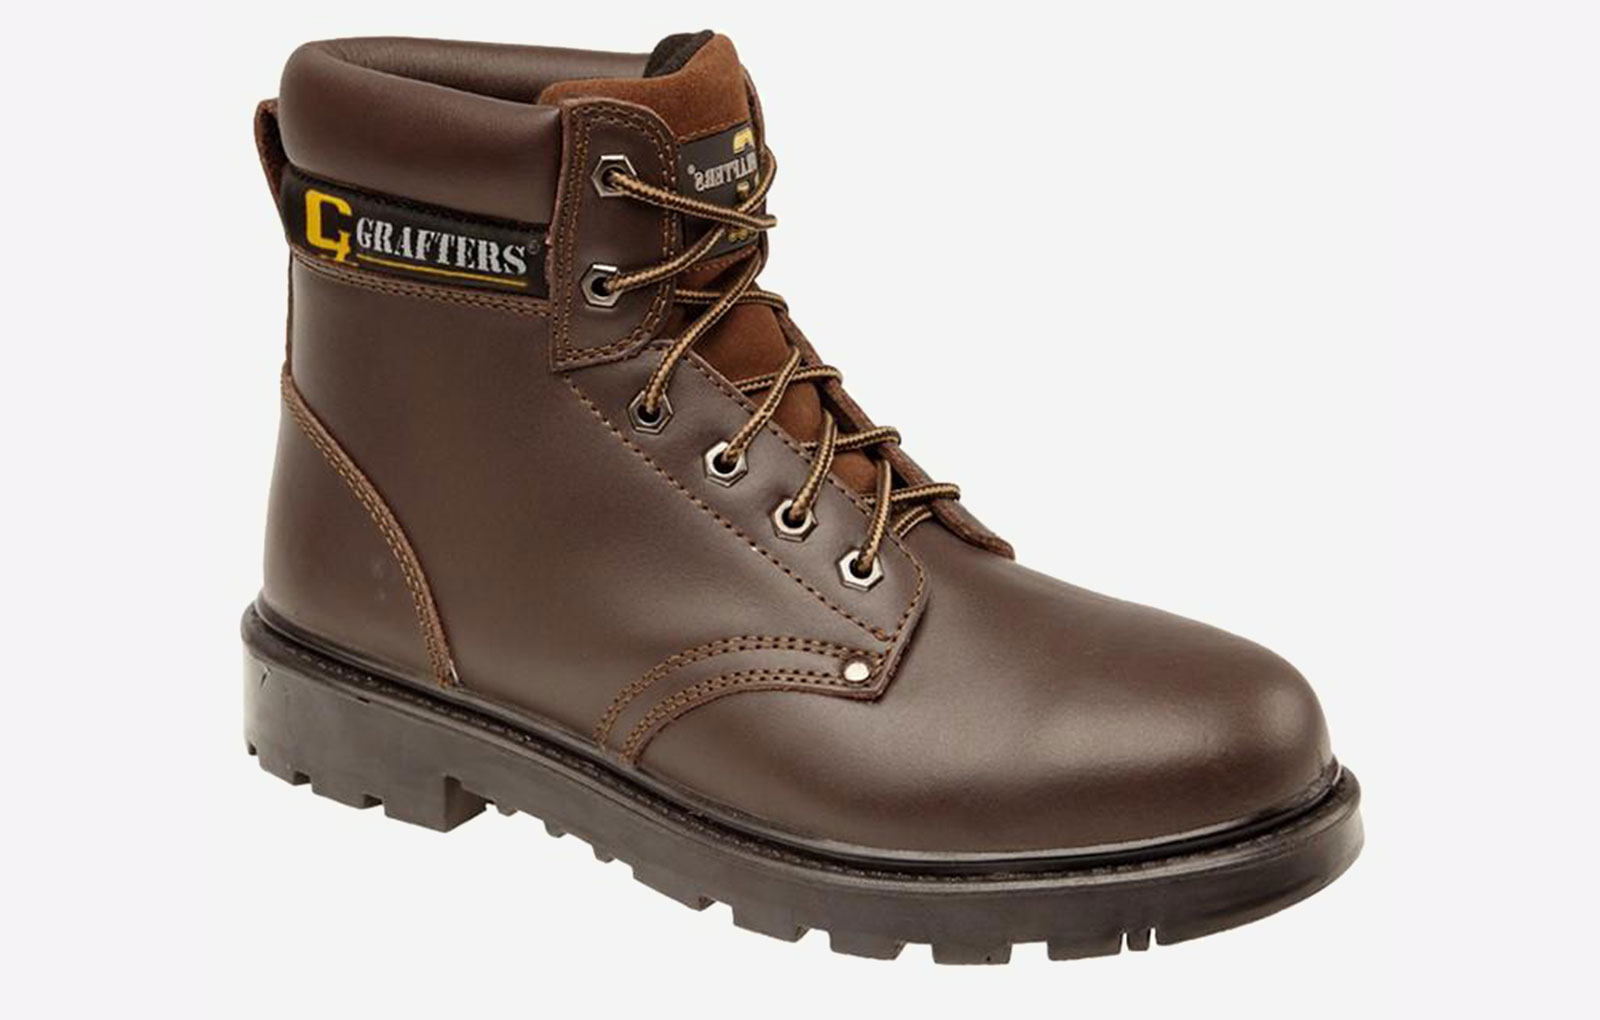 Grafters Apprentice Safety Boots Mens - GBD-1386